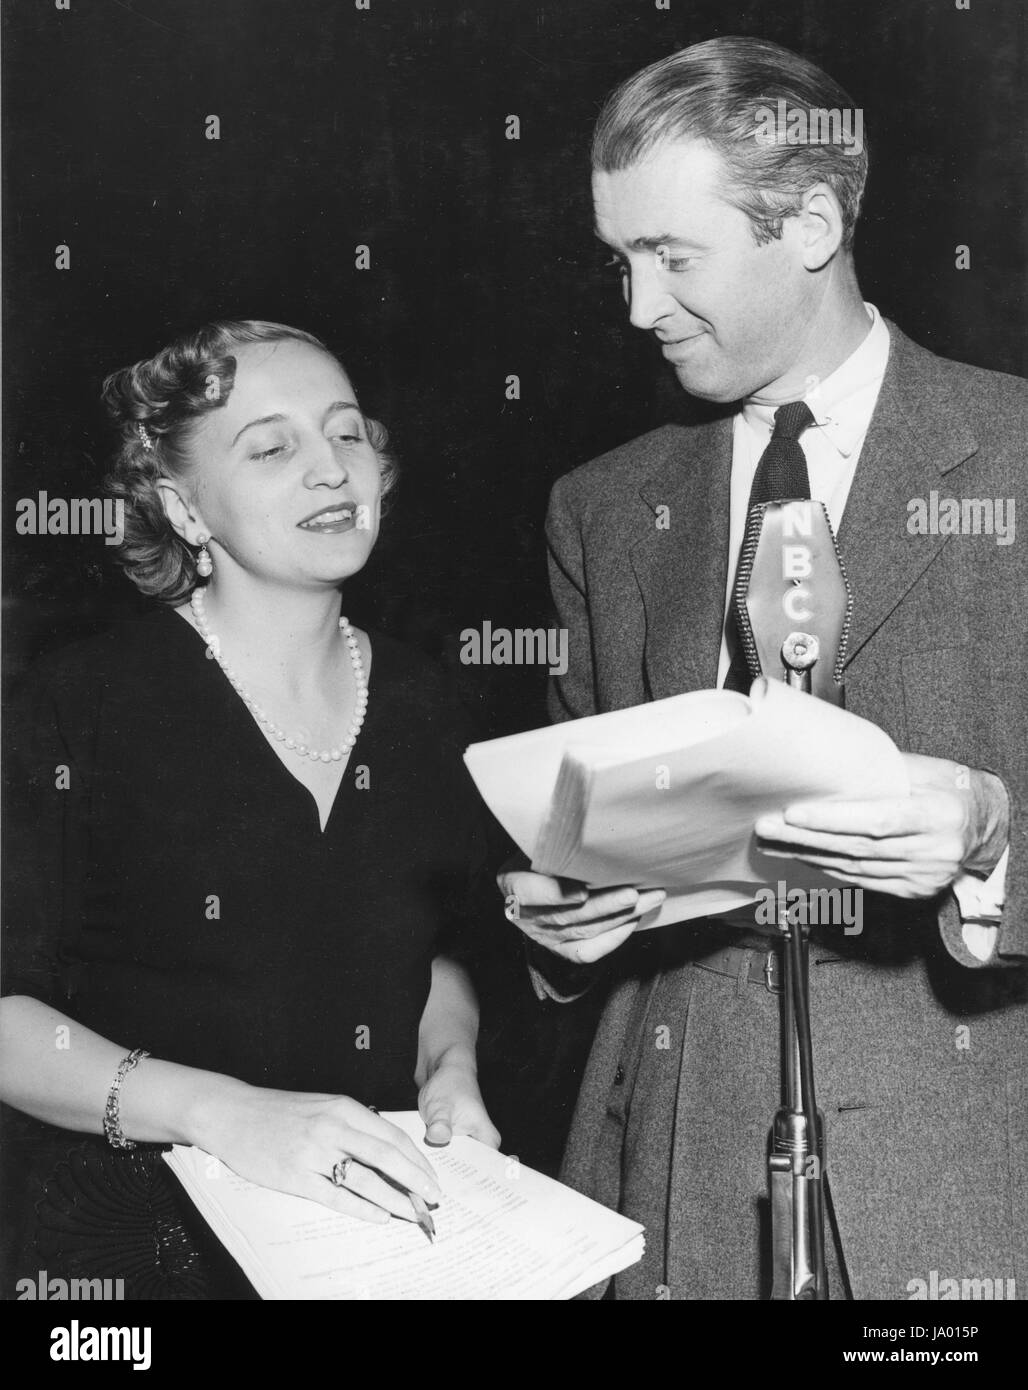 Margaret Truman, daughter of President Harry S. Truman, conferring with actor Jimmy Stewart before the two appeared together in a radio drama, Hollywood, CA, 04/01/1951. Stock Photo